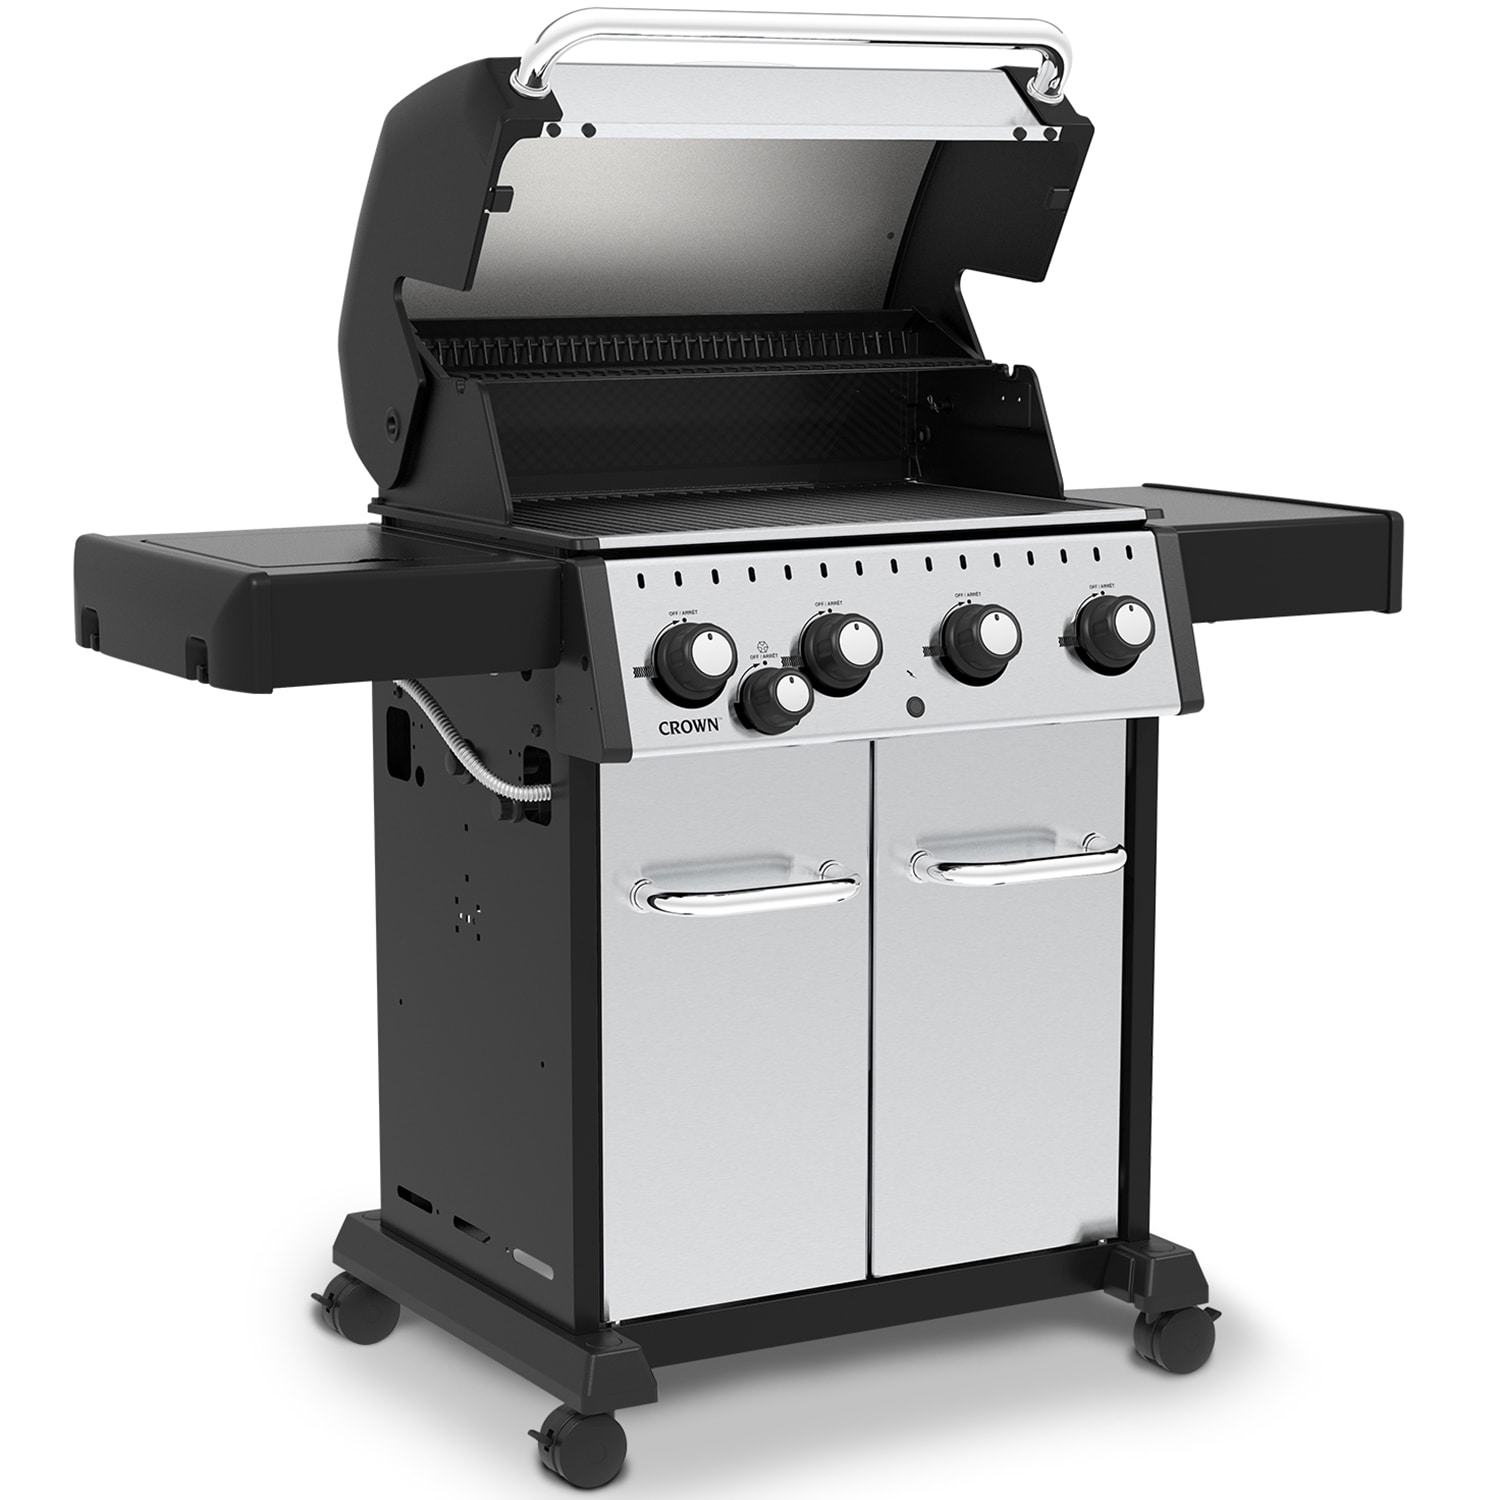 crush forurening Udgangspunktet Broil King Crown S 440 Stainless Steel 4-Burner Liquid Propane Gas Grill  with 1 Side Burner in the Gas Grills department at Lowes.com